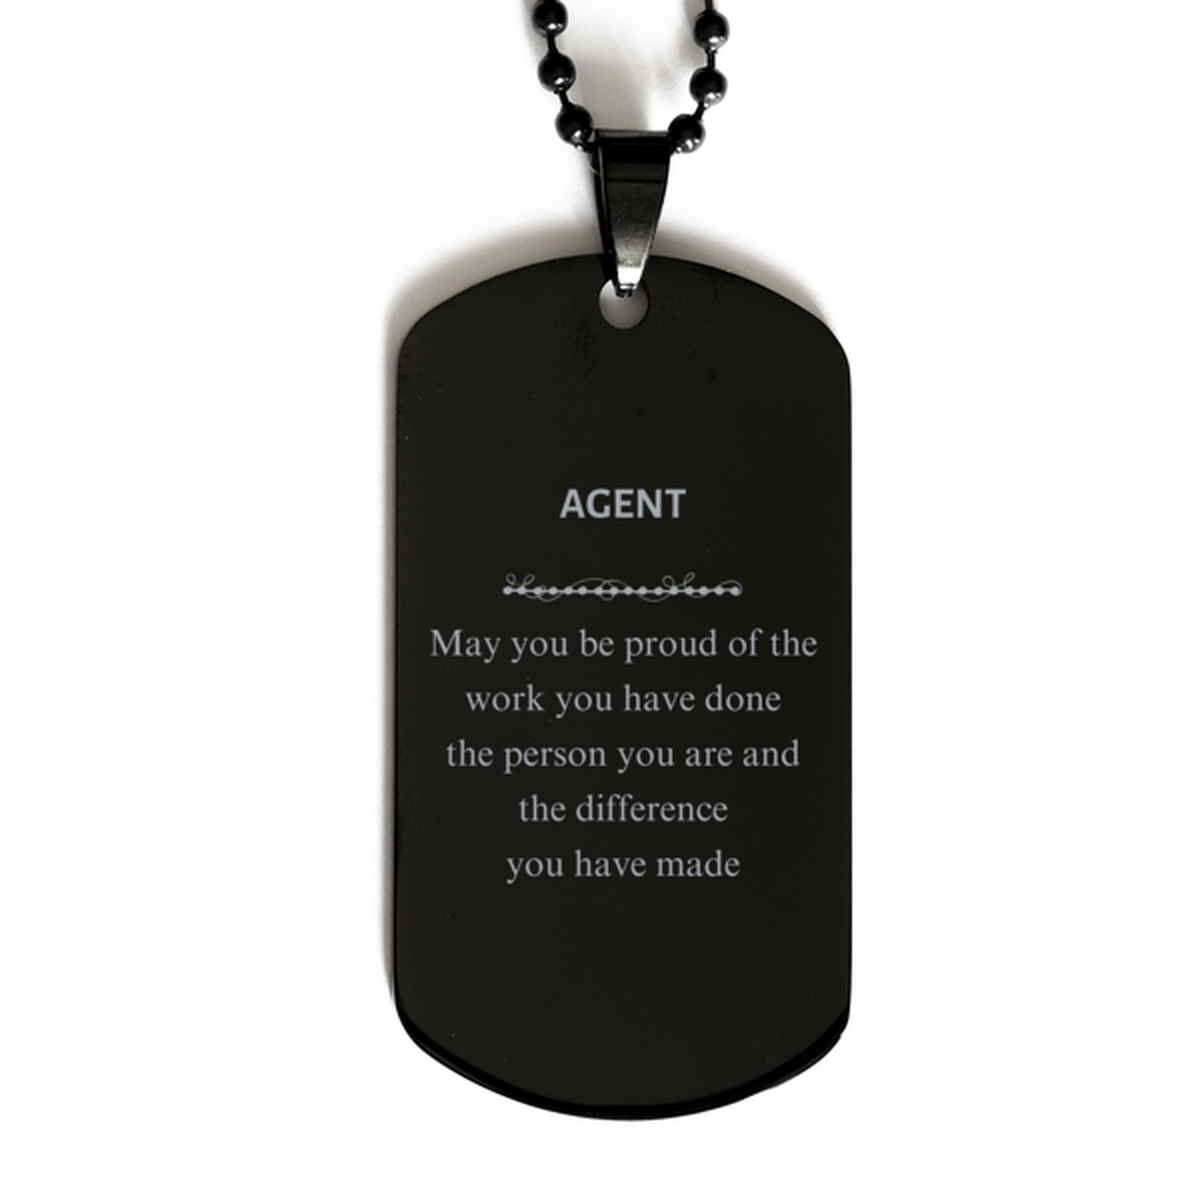 Agent May you be proud of the work you have done, Retirement Agent Black Dog Tag for Colleague Appreciation Gifts Amazing for Agent